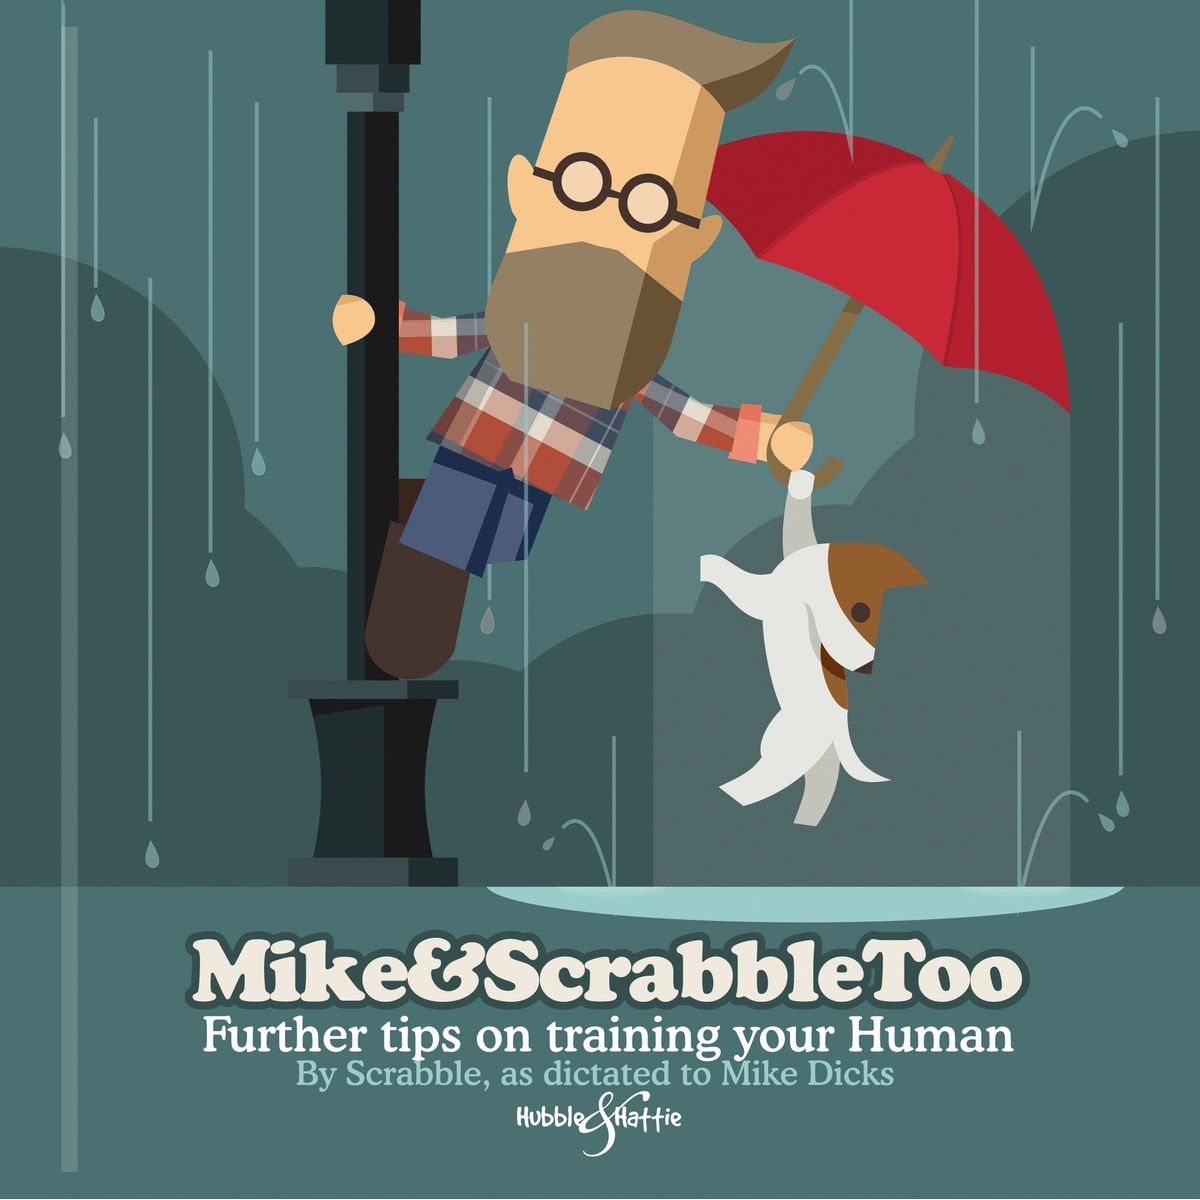 ISBN: 9781787110601 / 1787110605 - Mike&ScrabbleToo: Further tips on Training Your Human by Scrabble, as dictated to Mike Dicks [2017]